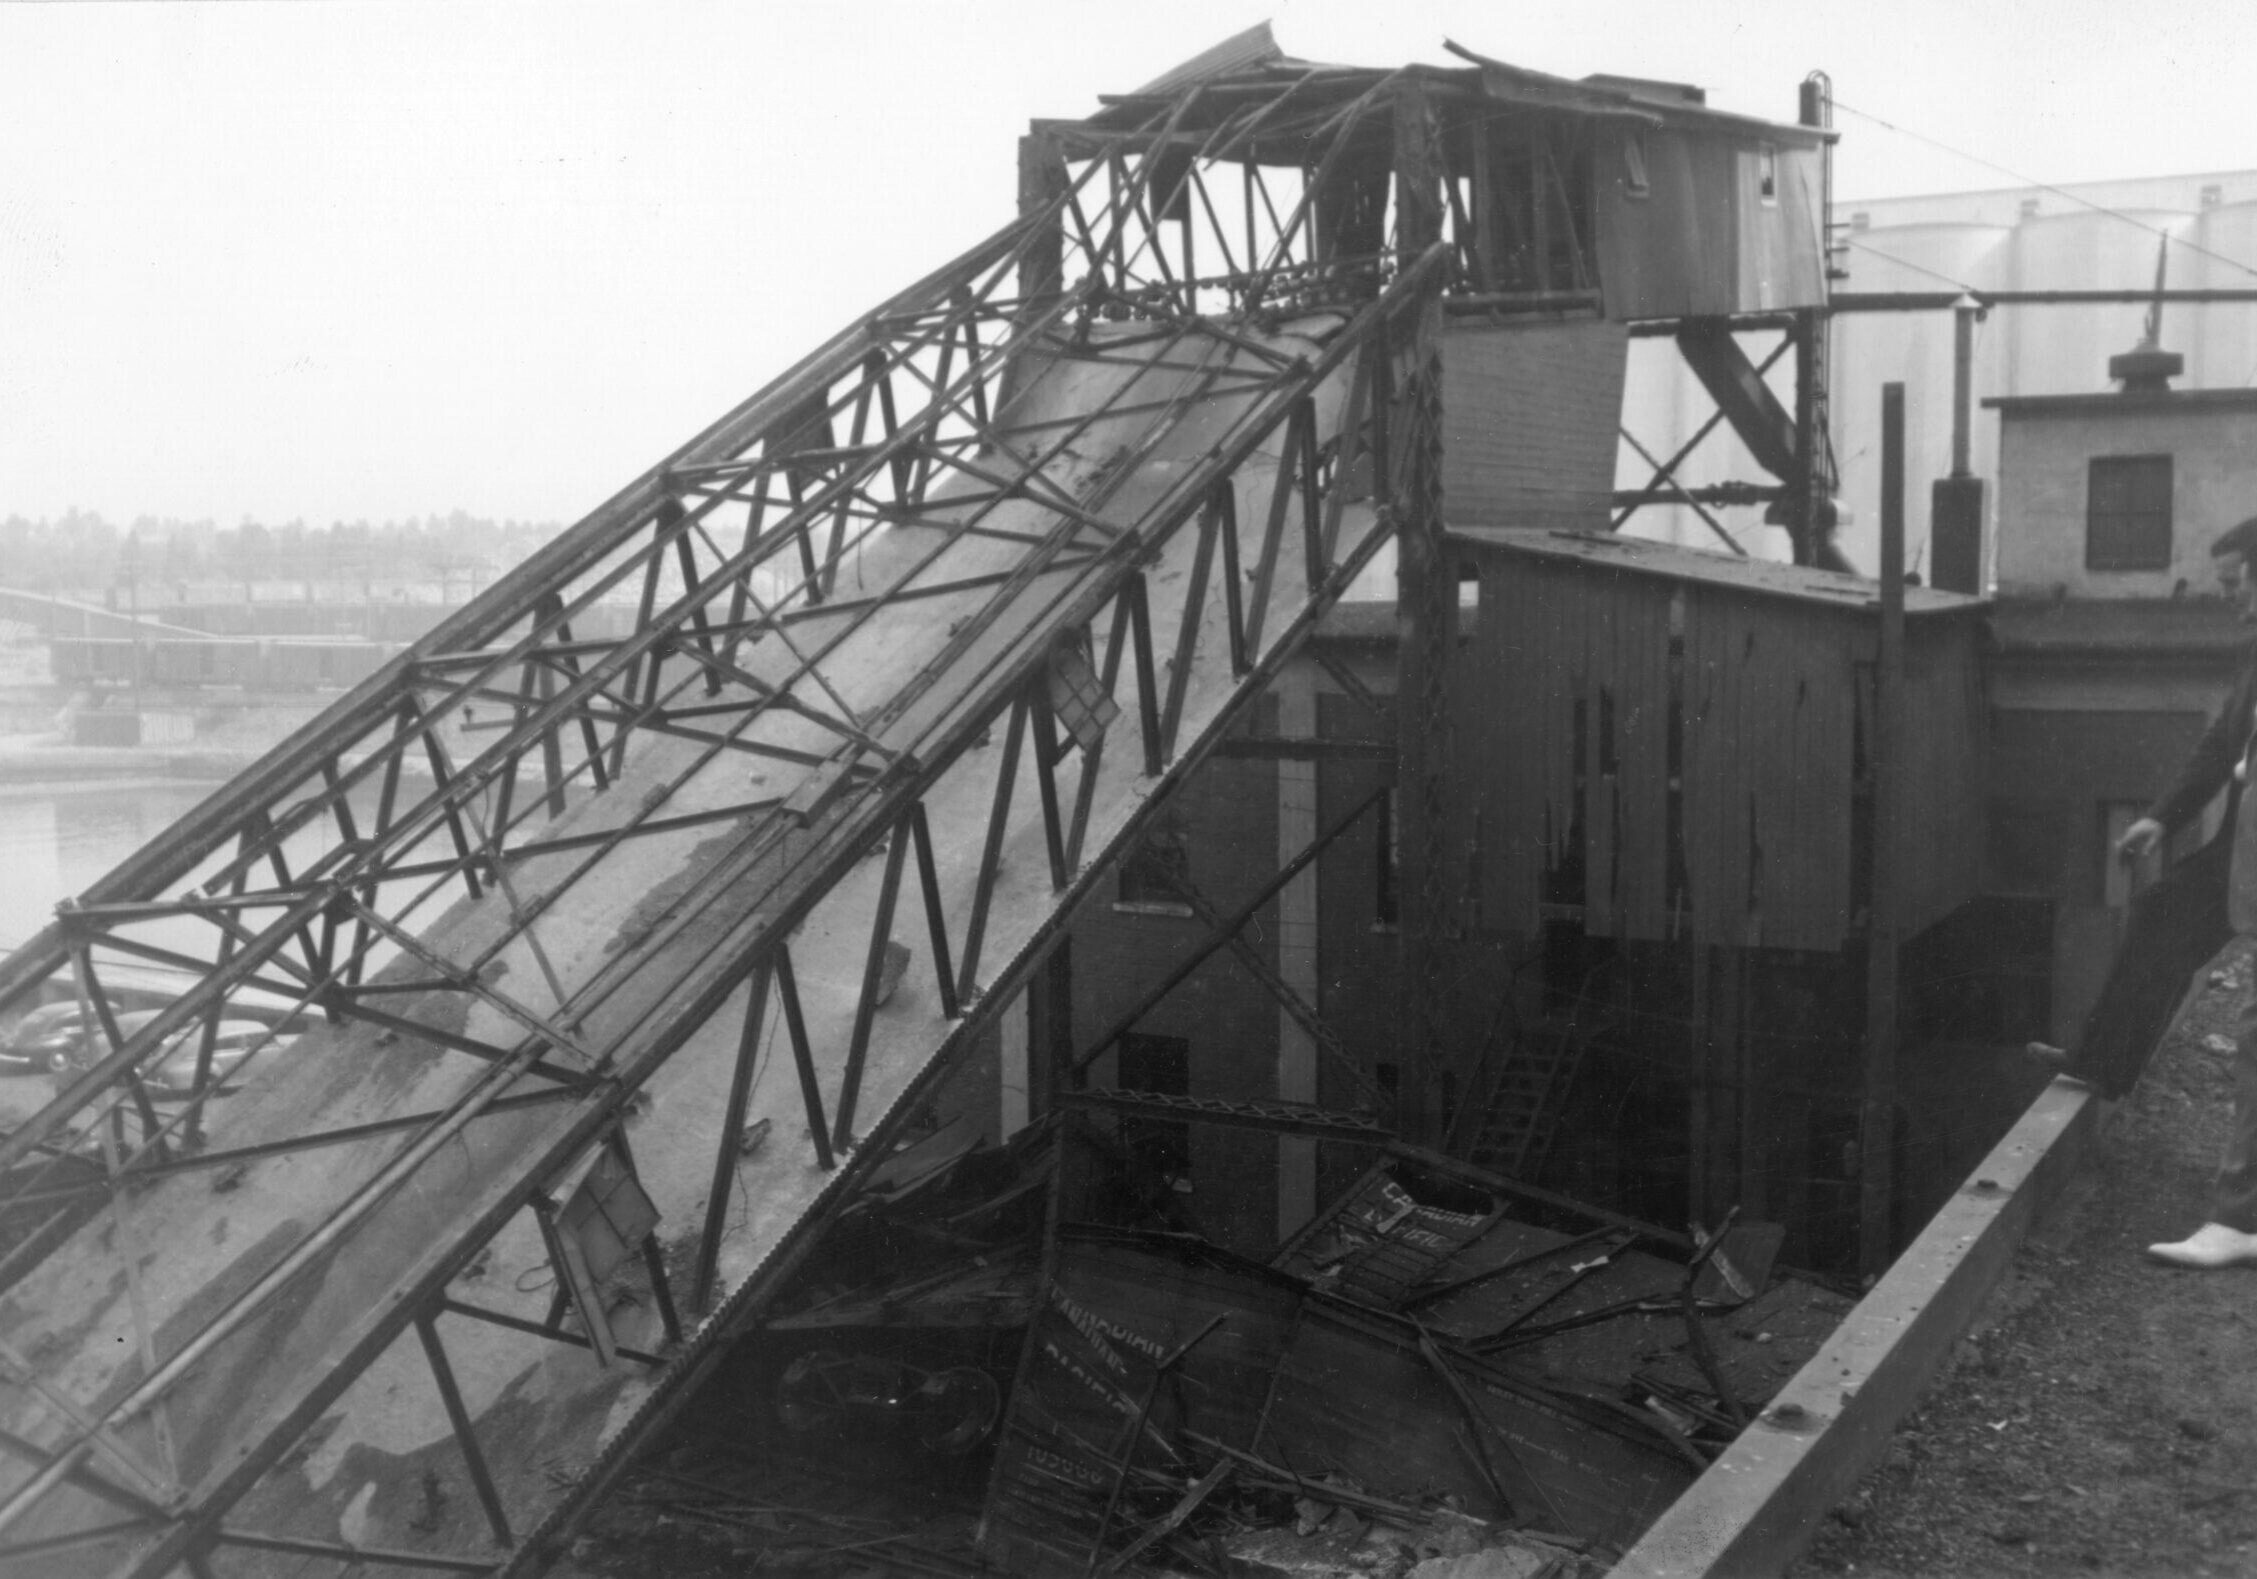 SASKATCHEWAN COOPERATIVE 5 EXPLOSION Roof of Trackshed Paterson Archives 6735